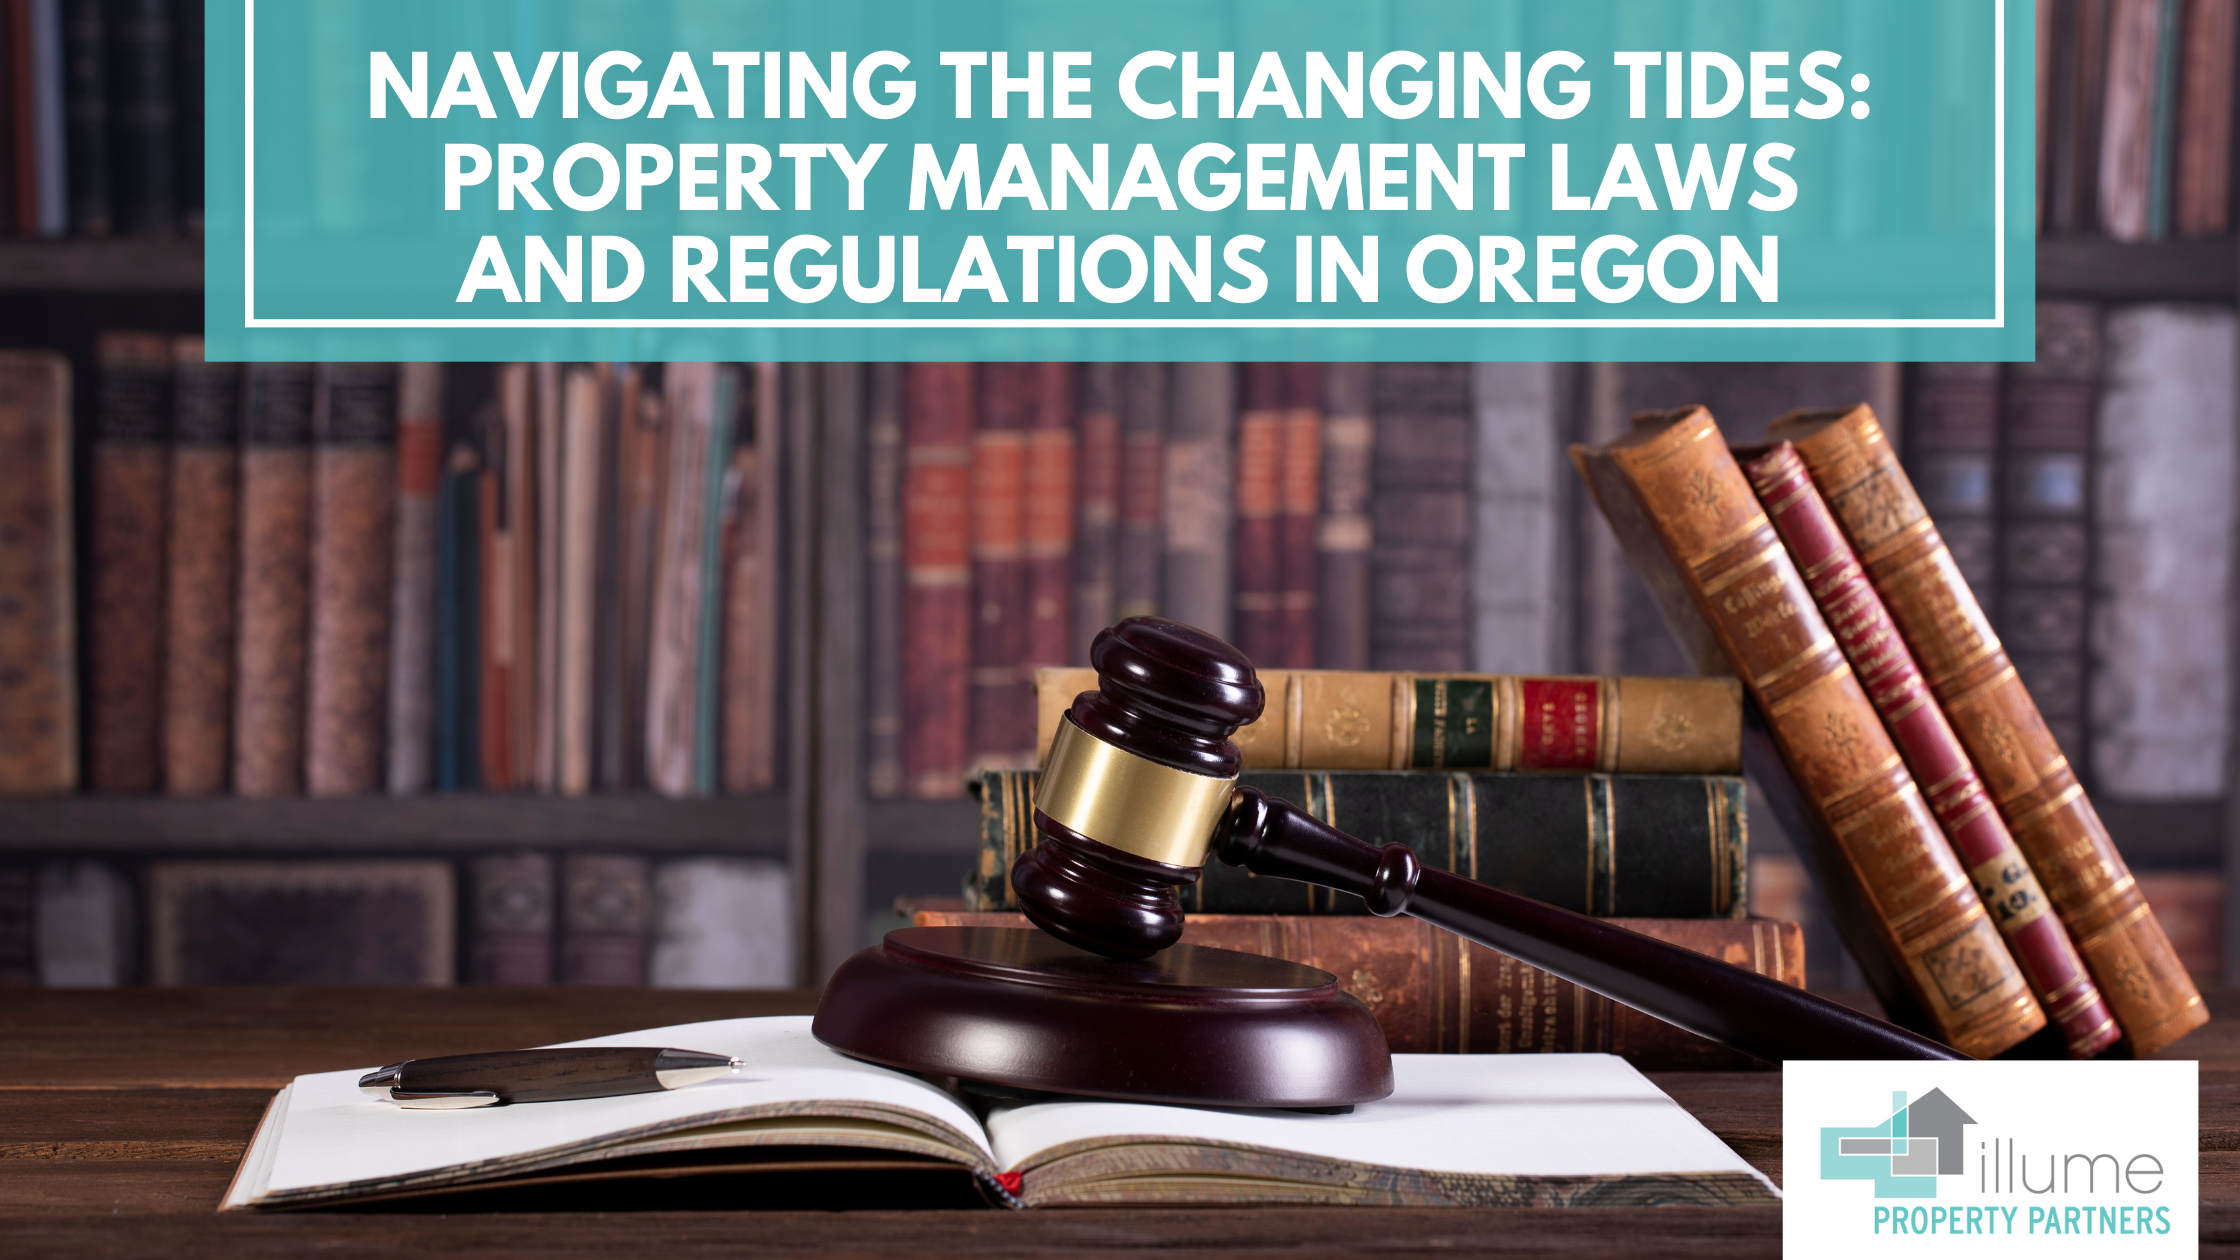 Navigating the Changing Tides: Property Management Laws and Regulations in Oregon